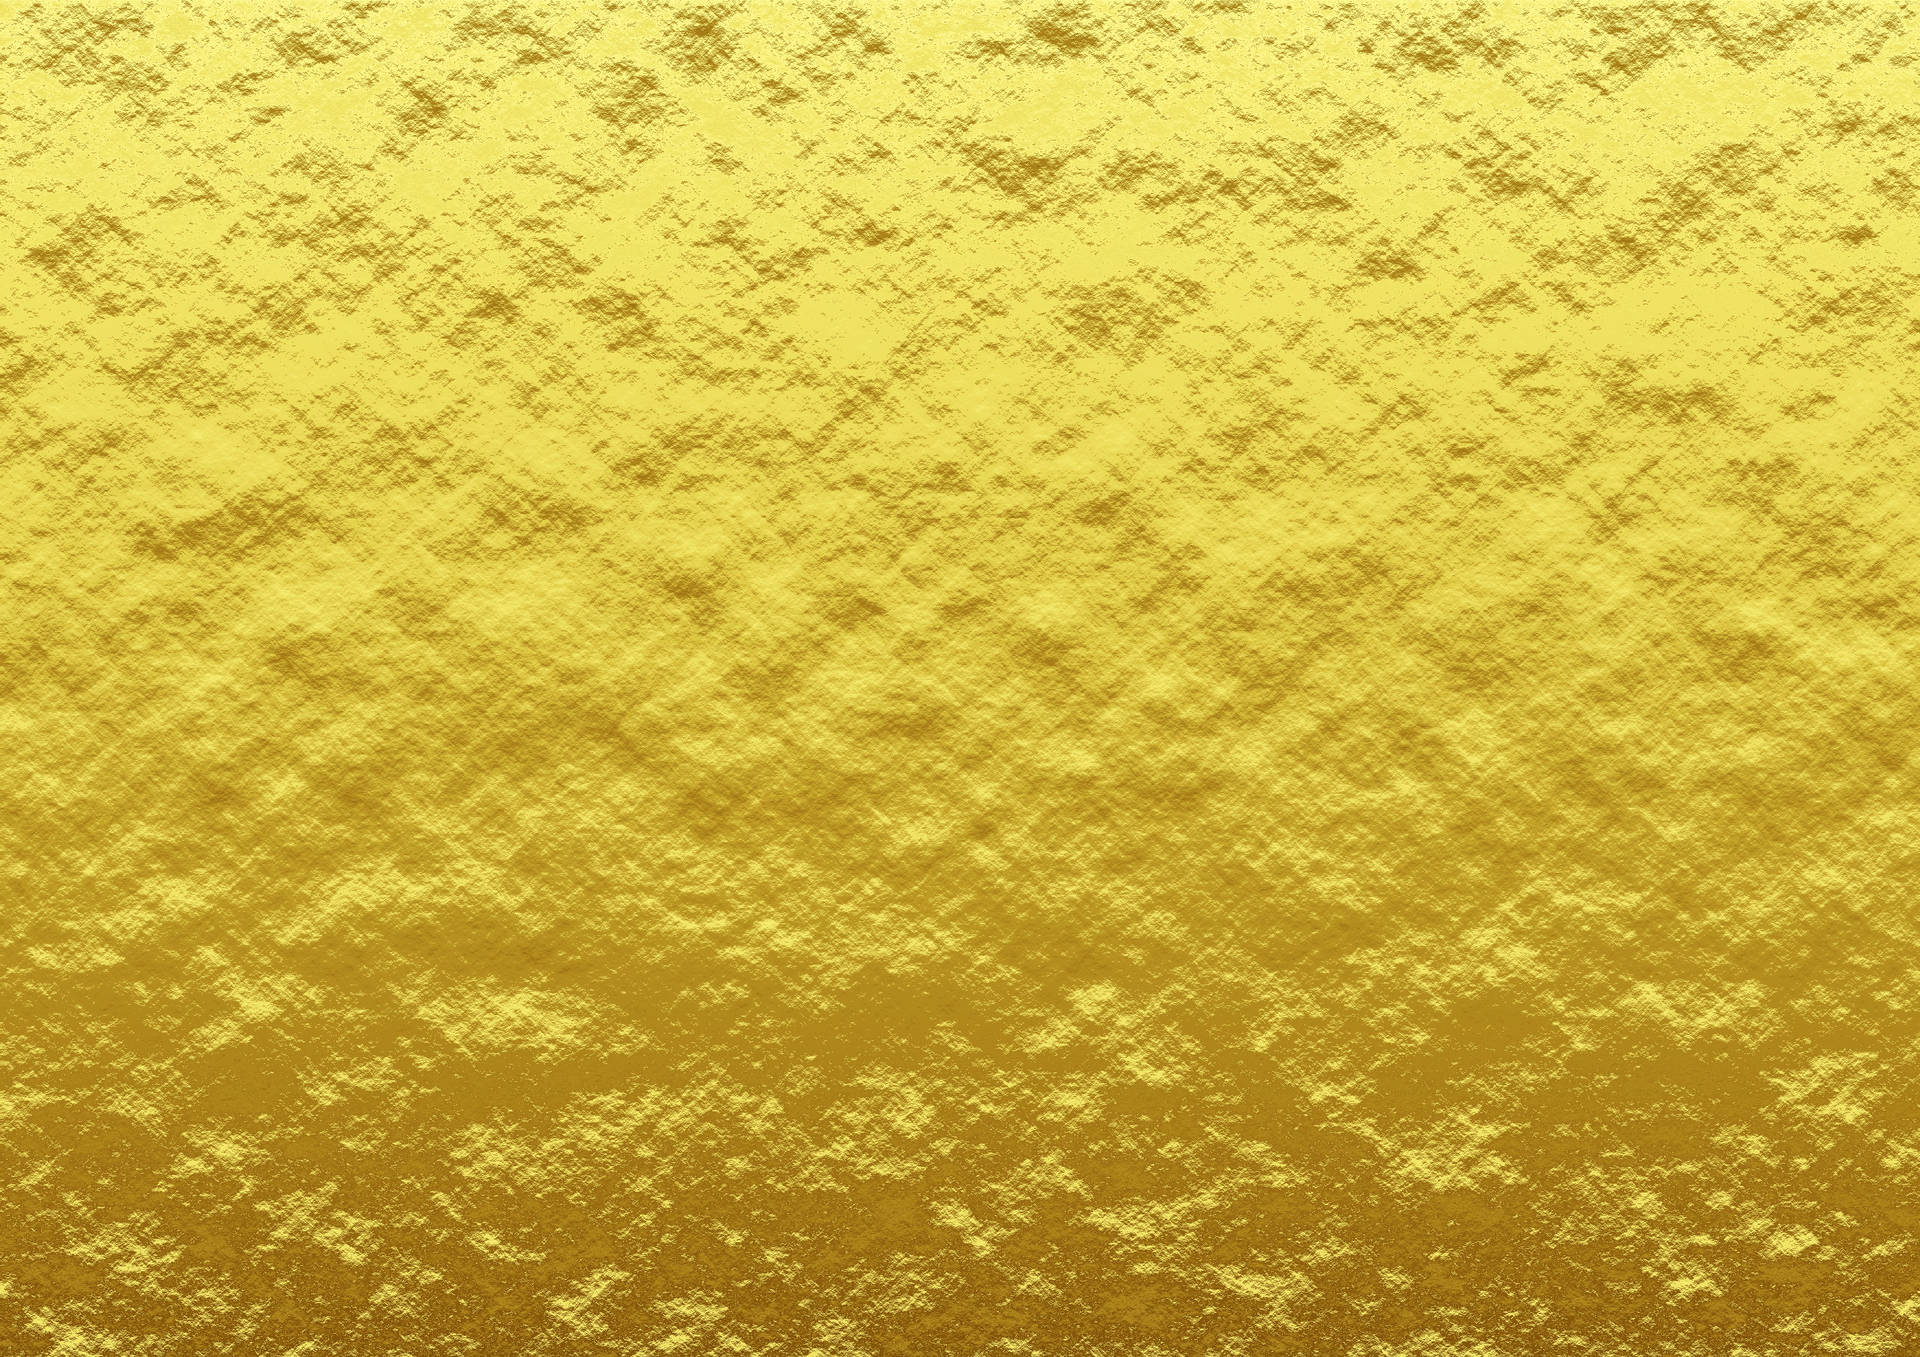 3508X2480 Yellow Wallpaper and Background